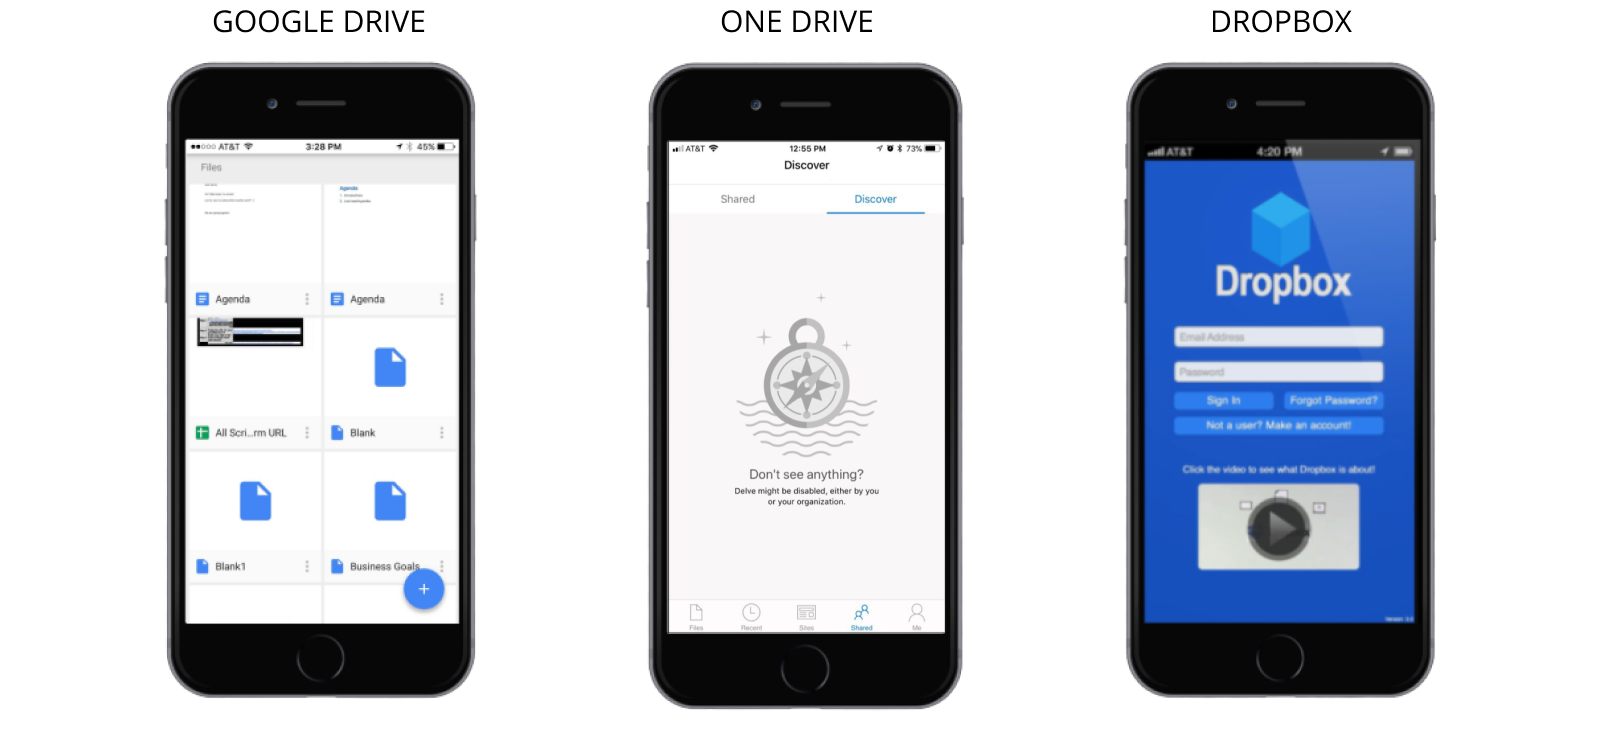 Image showing 3 phone screens (Google Drive, Drop box and Onedrive)